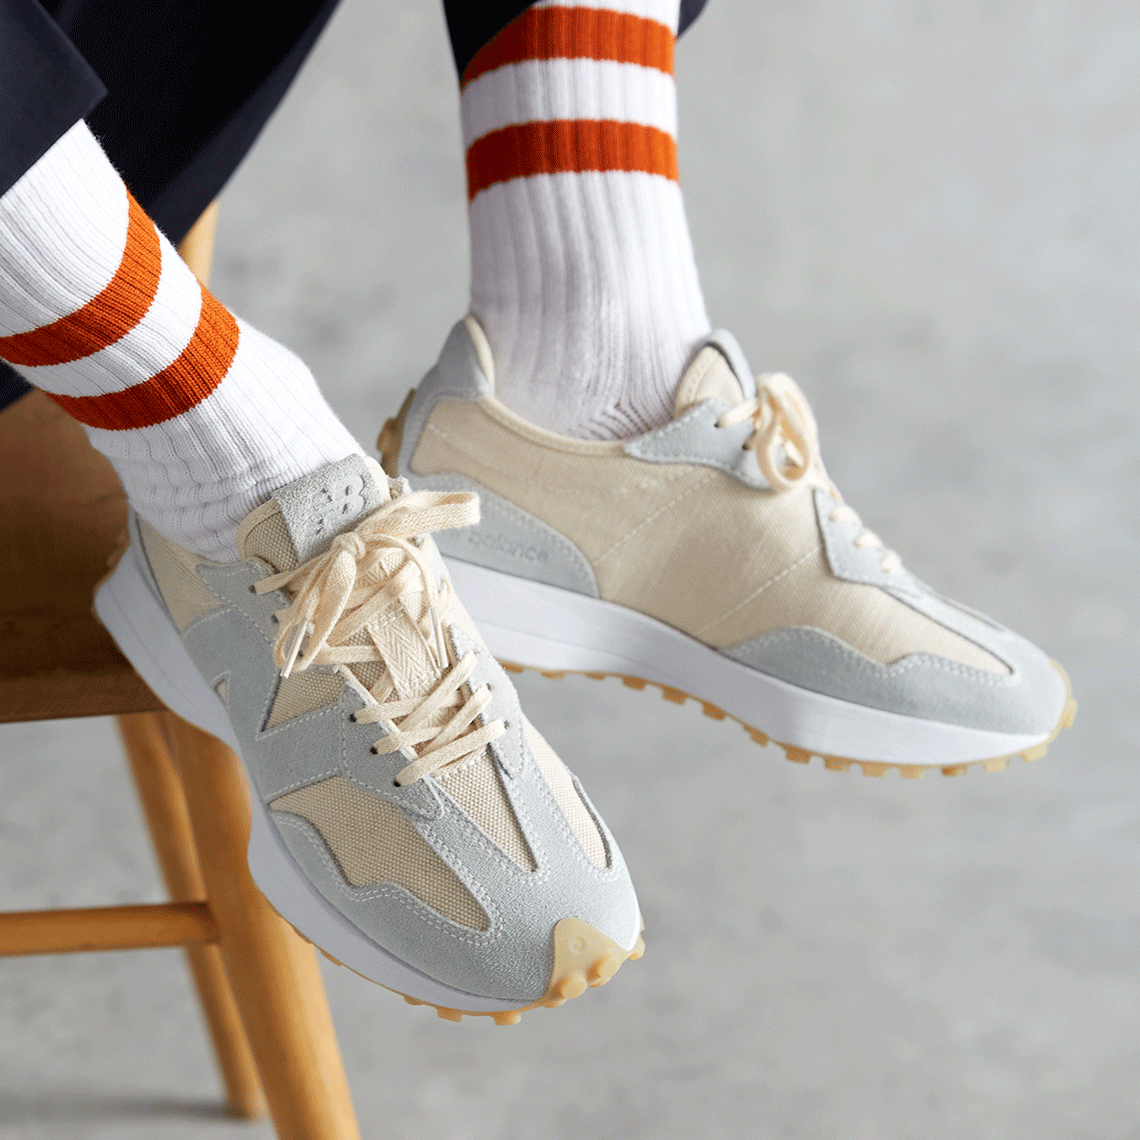 New Balance 327 Undyed Release Date 